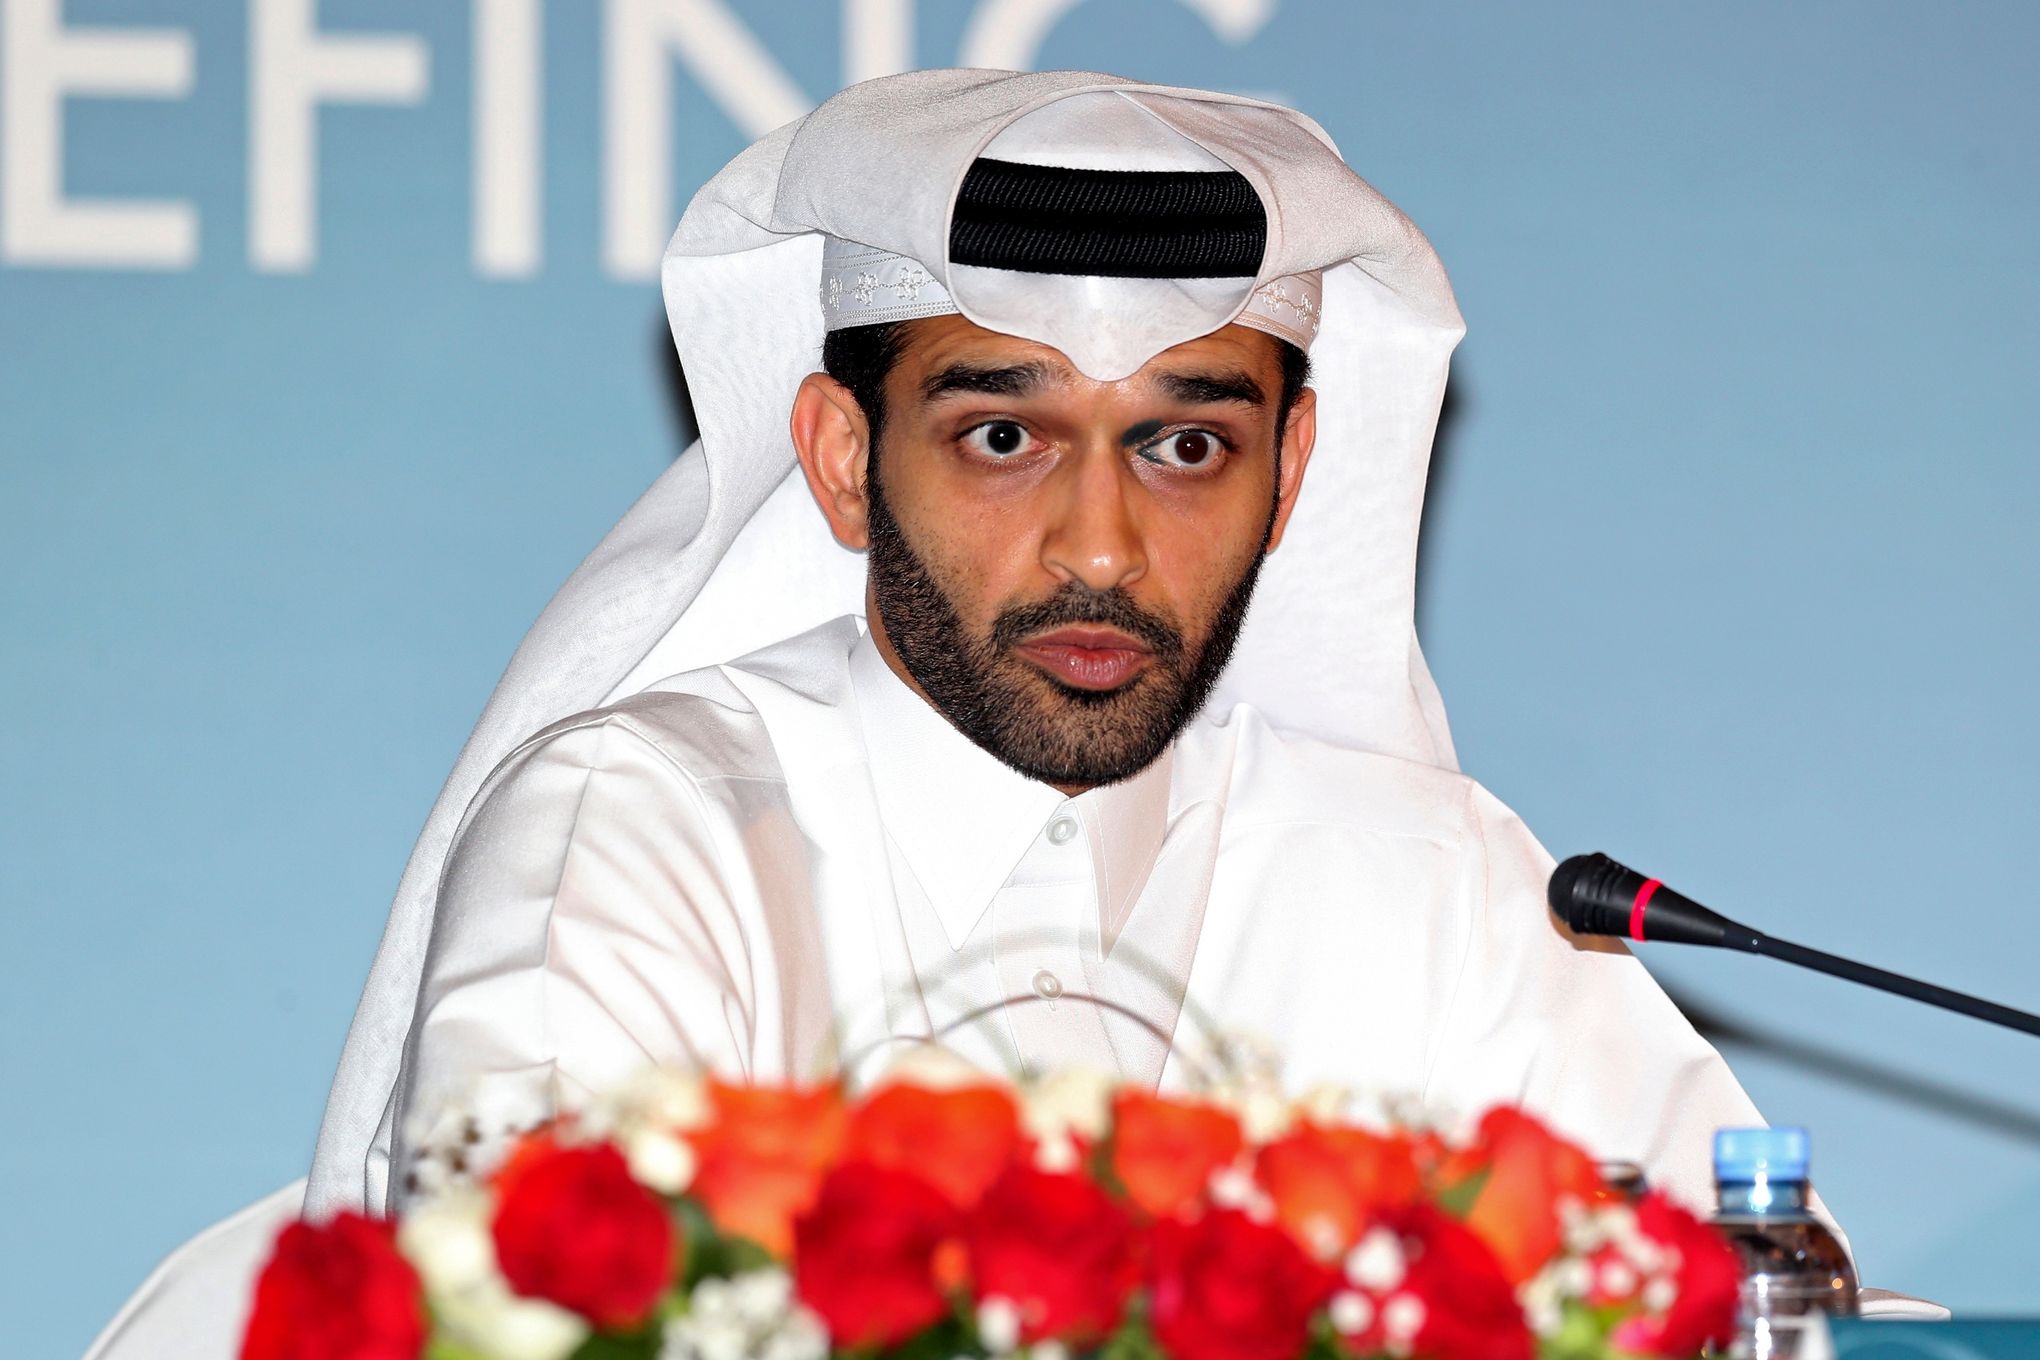 2022 Qatar World Cup cuts jobs after efficiency exercise The 